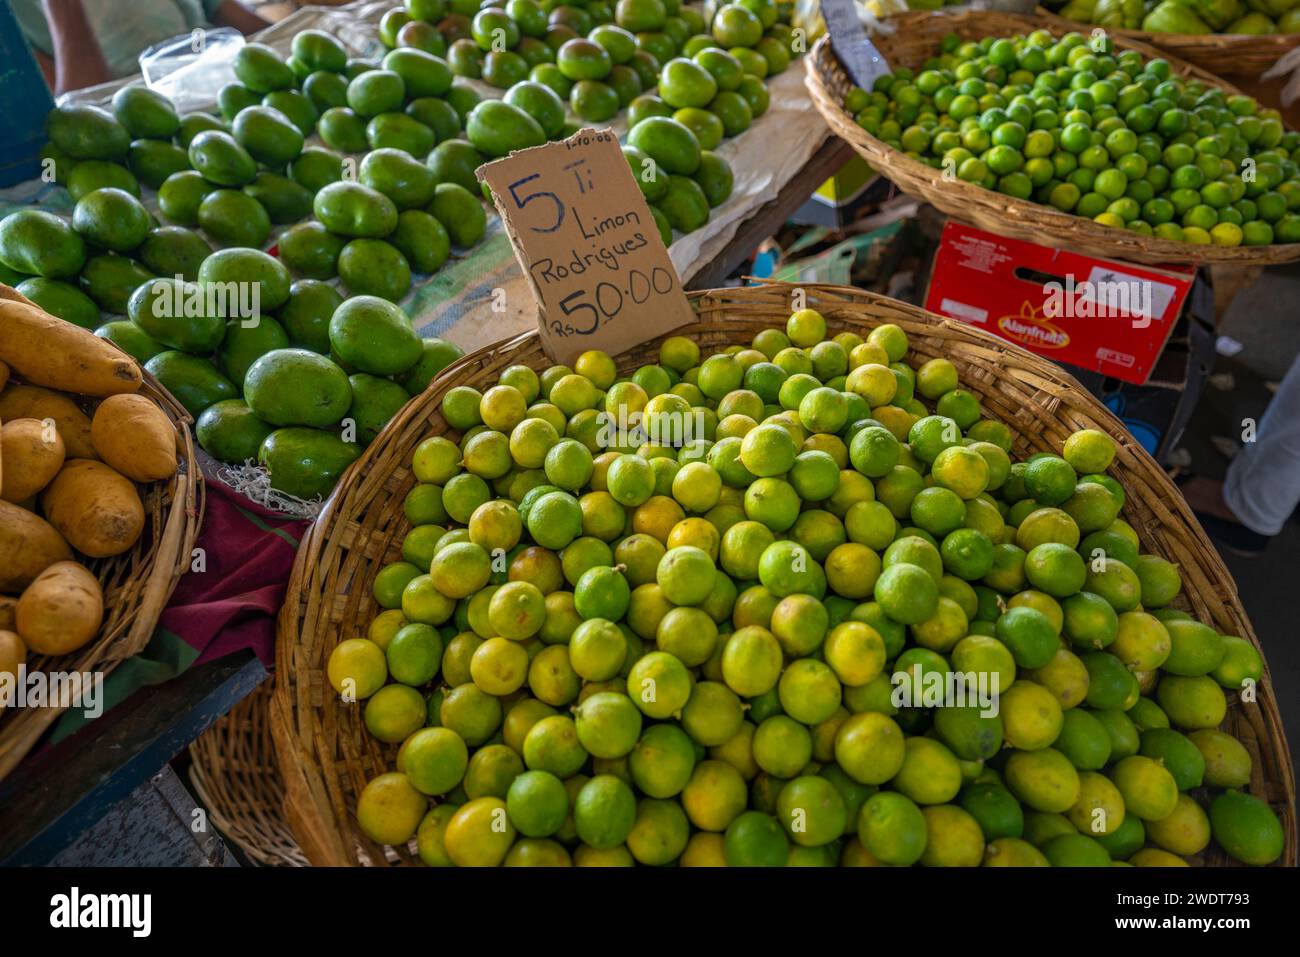 View of fruit stall selling limes and mangoes on market near bus station, Port Louis, Mauritius, Indian Ocean, Africa Stock Photo